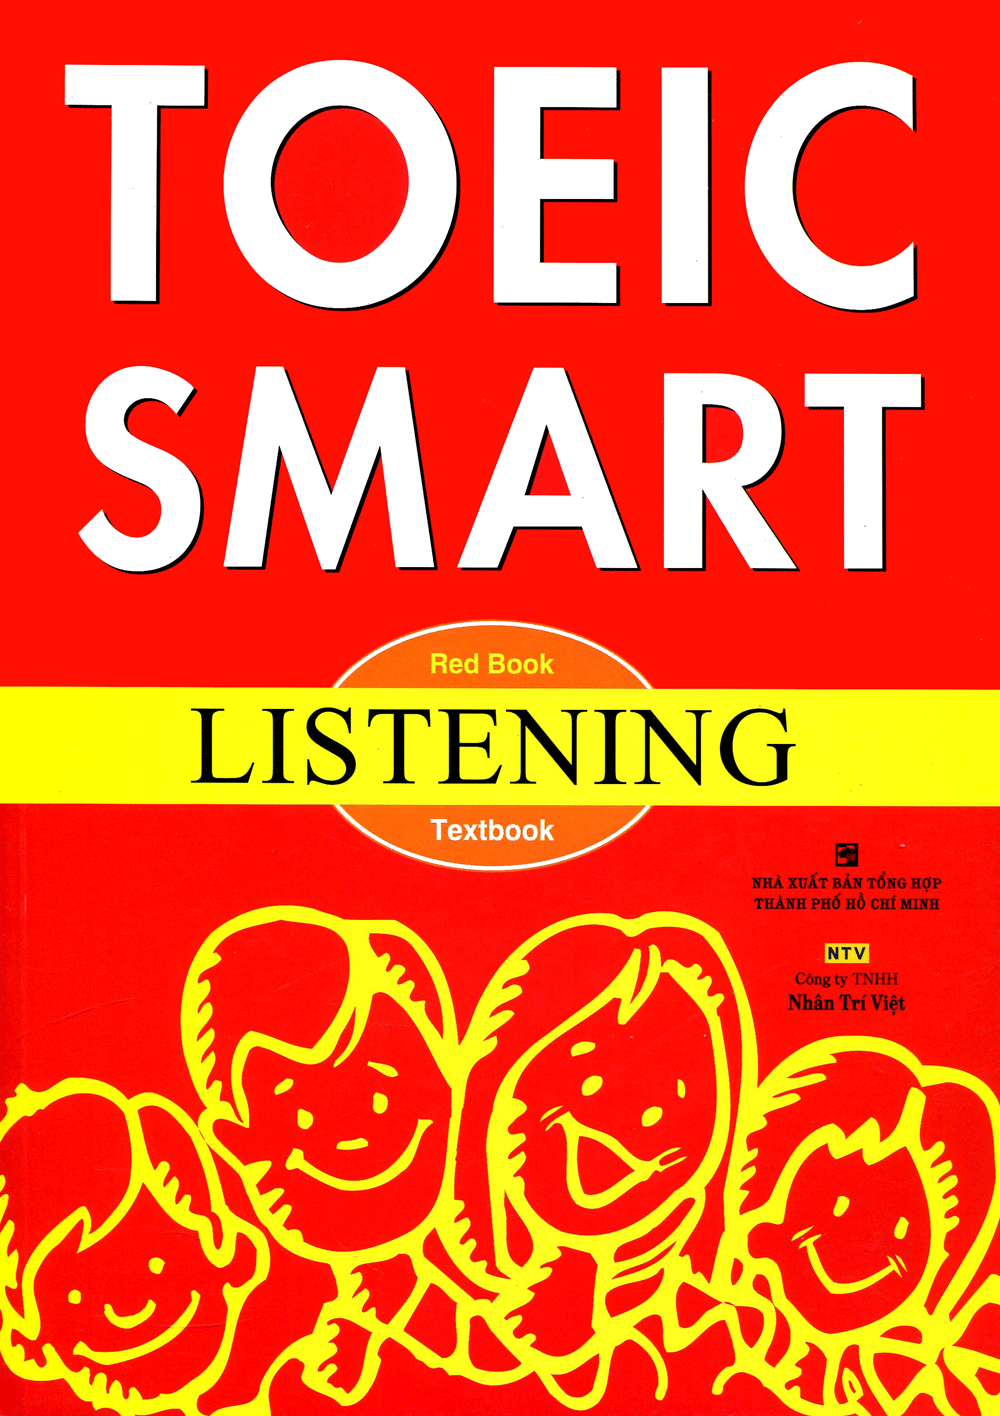 Toeic Smart - Red Book Listening